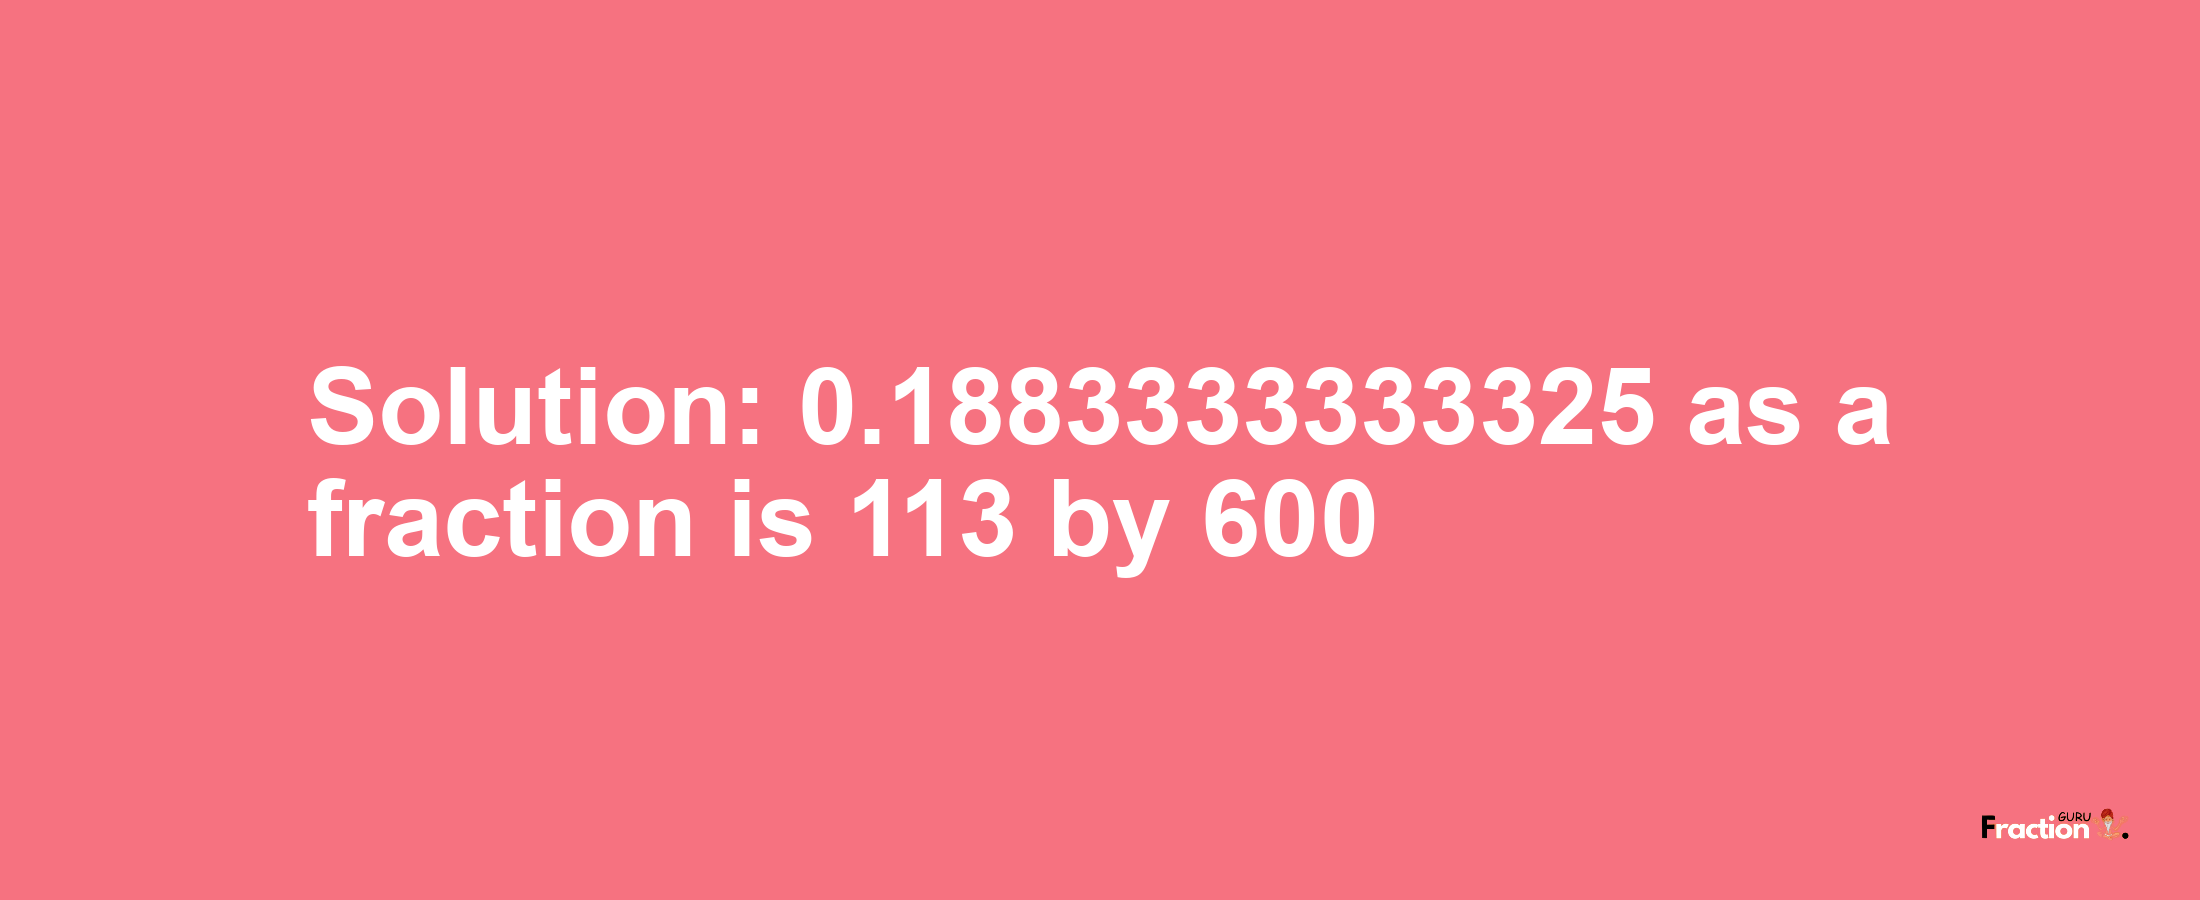 Solution:0.1883333333325 as a fraction is 113/600